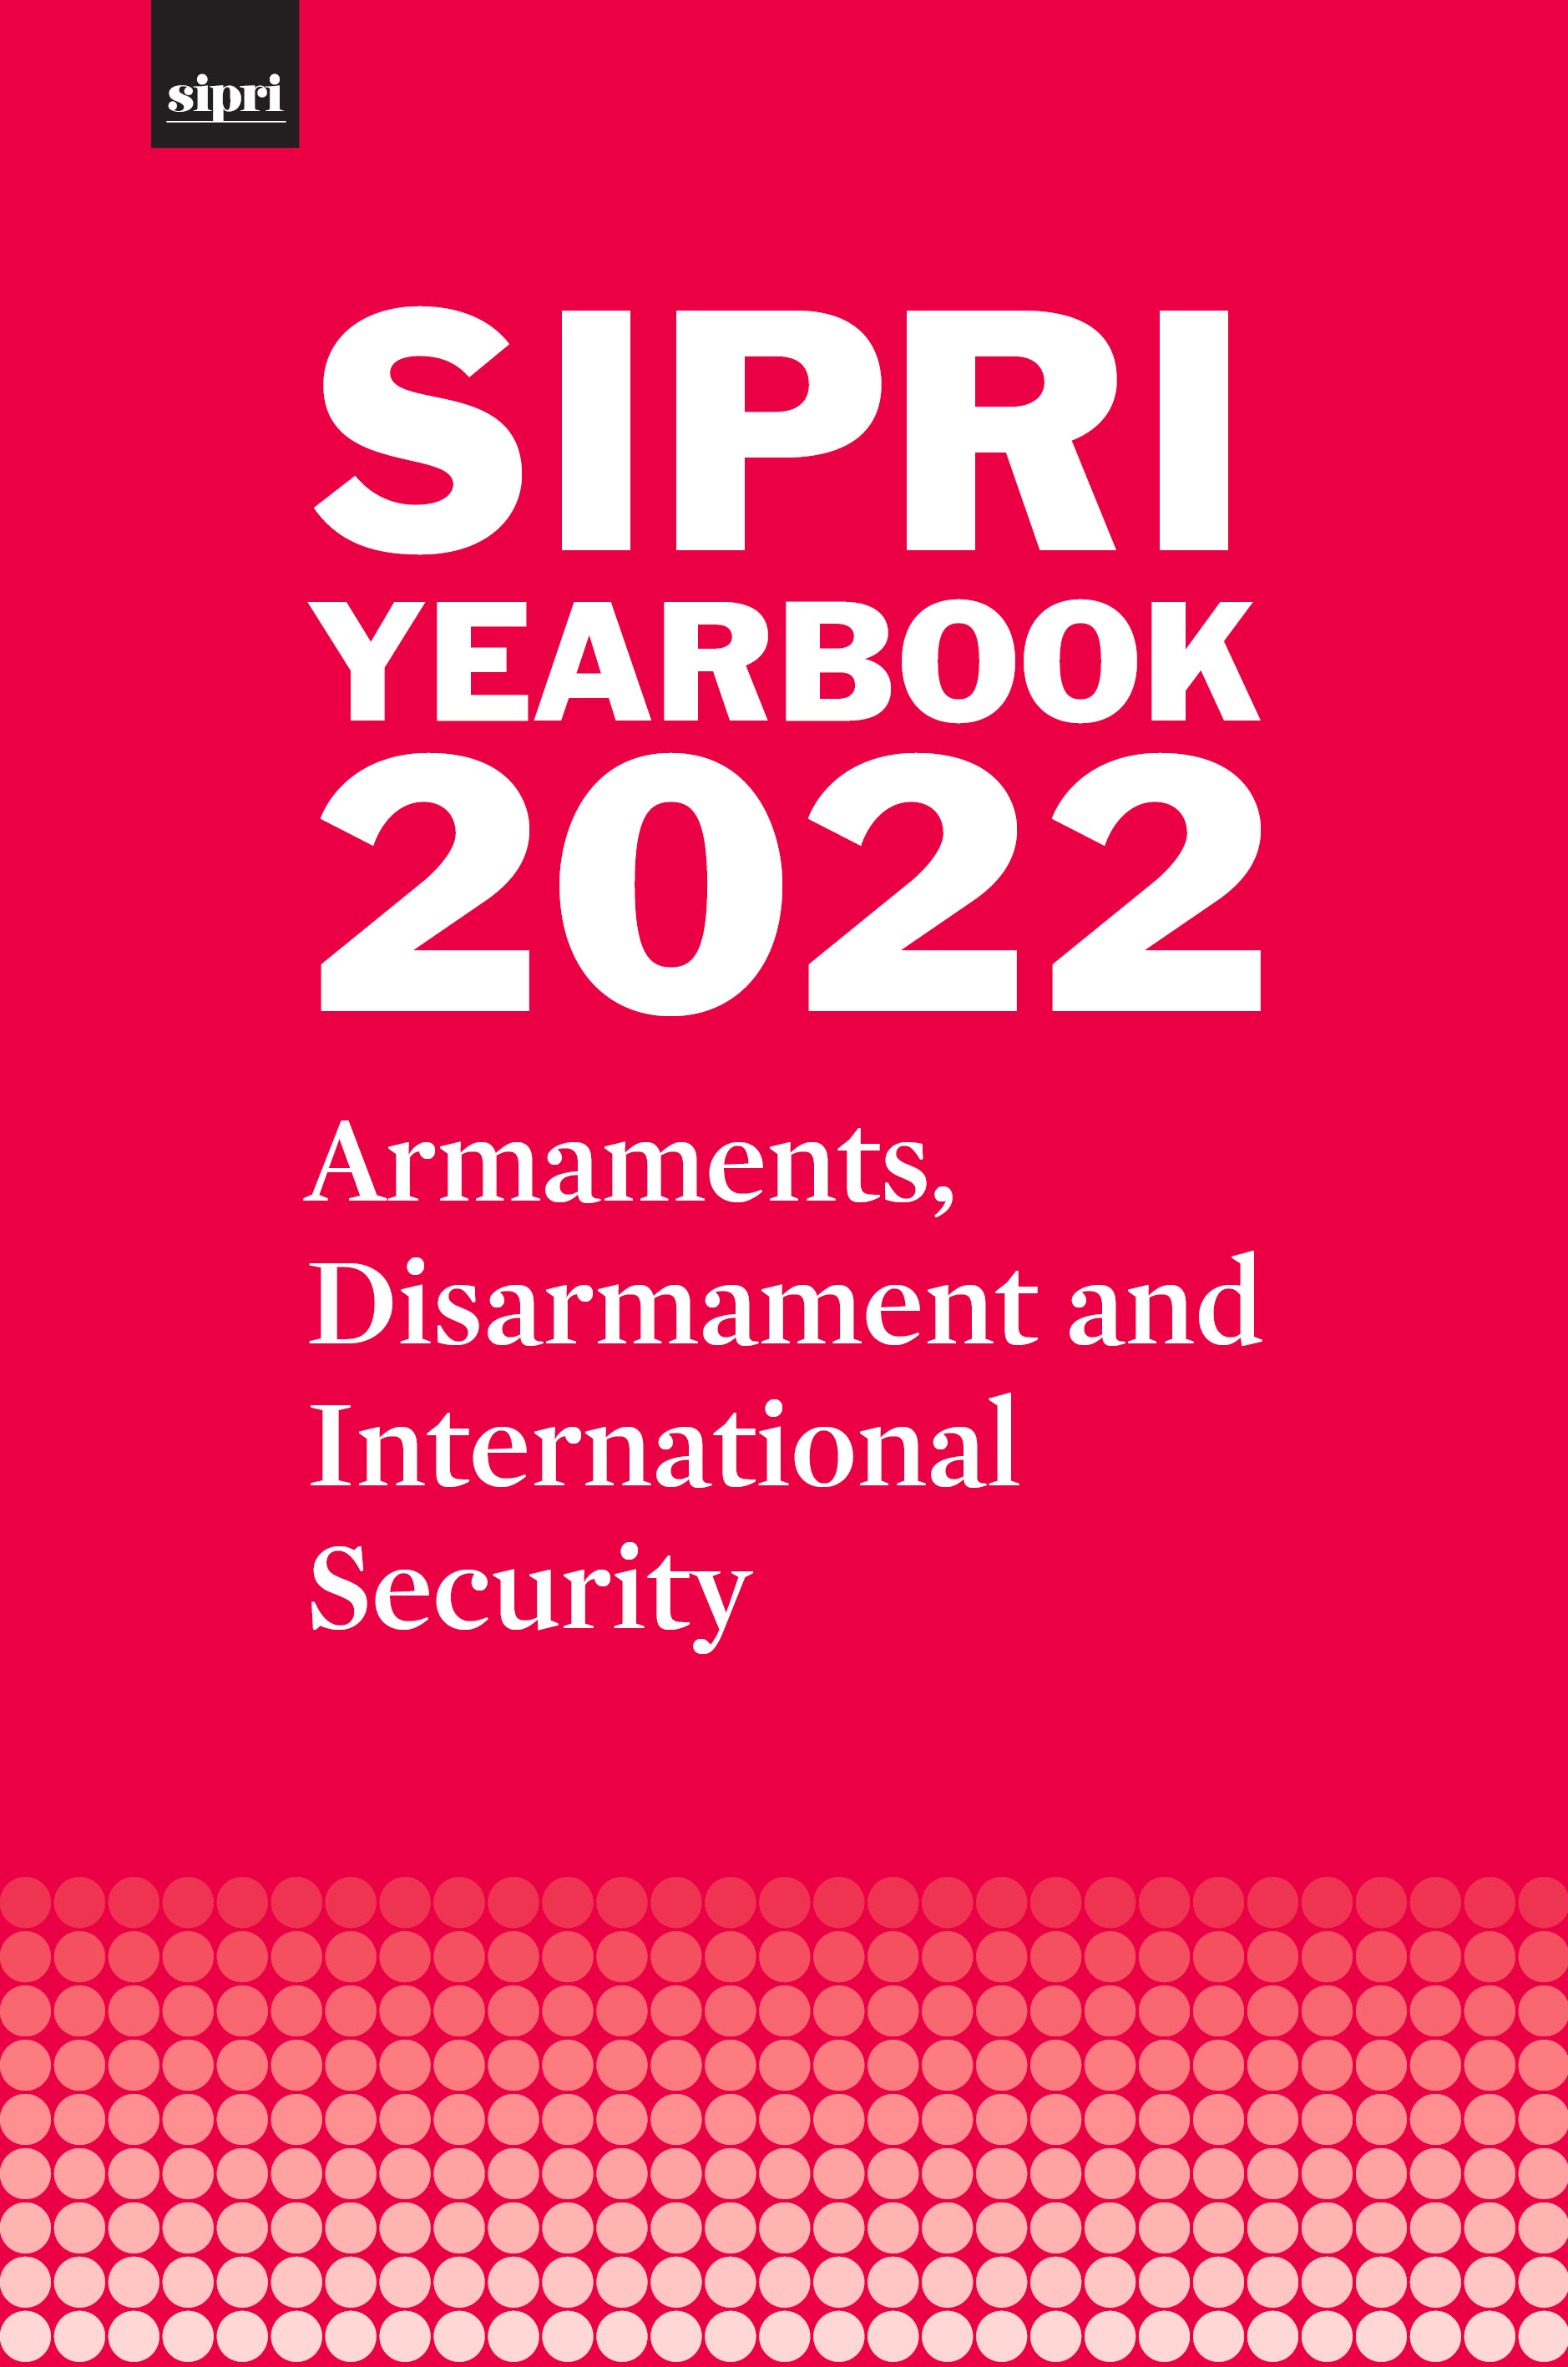 SIPRI Yearbook 2022